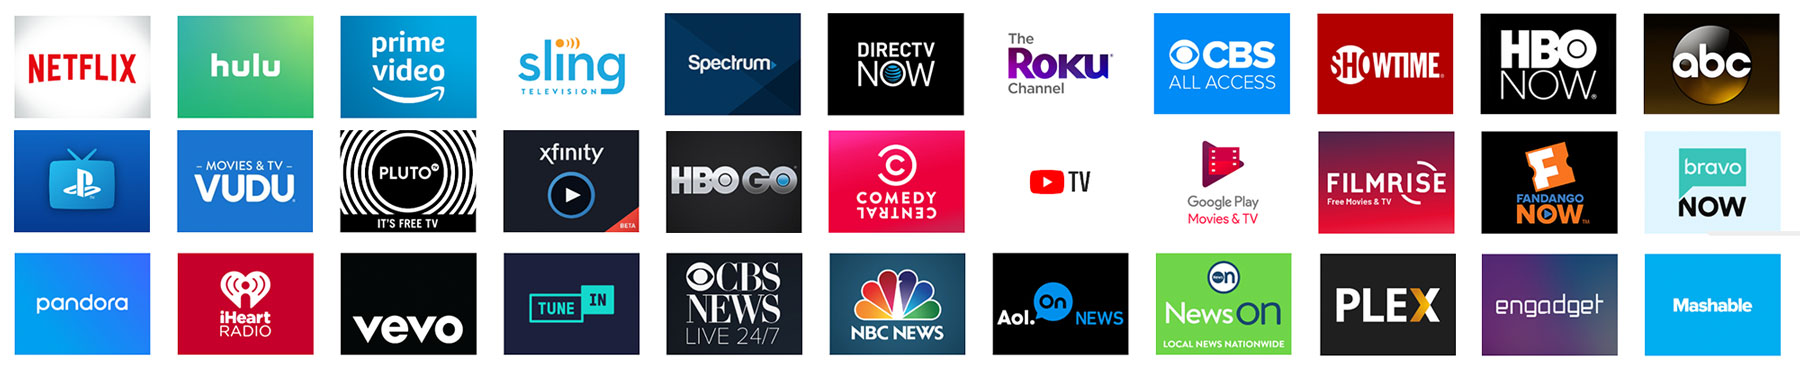 The best Roku features you might not be aware of